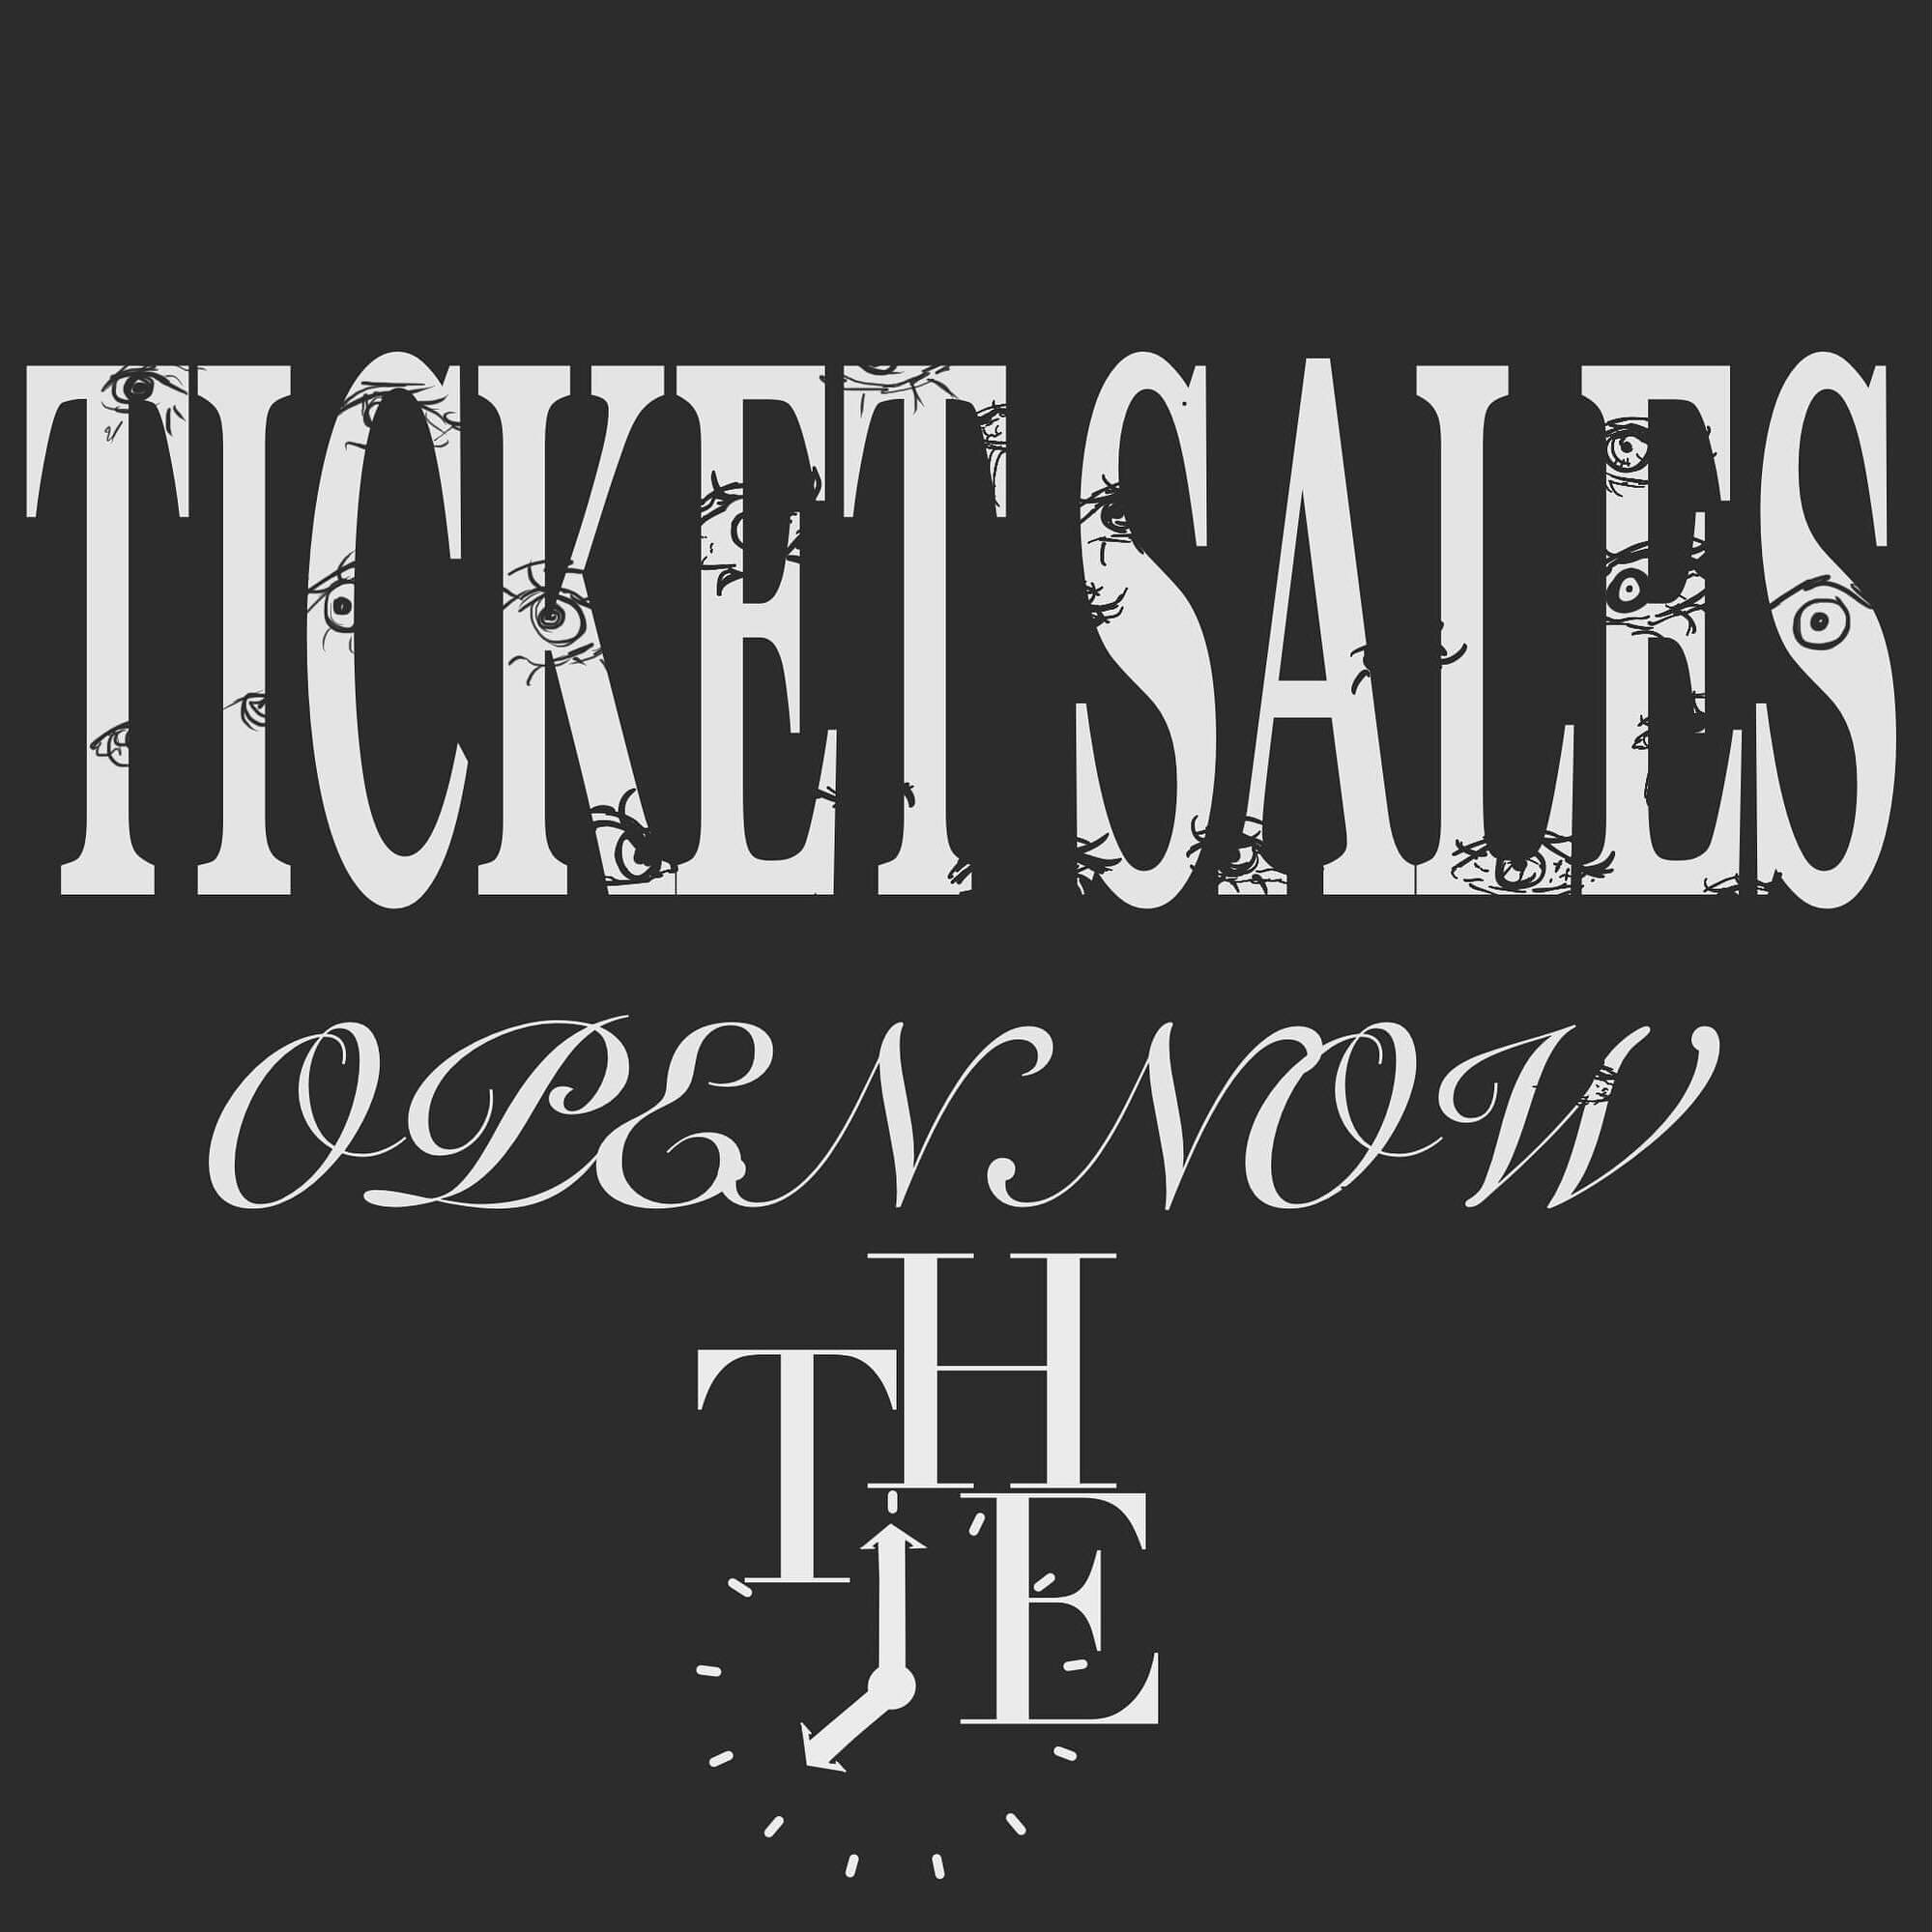 🎟TICKETS ON SALE NOW 🎟

Get yours via the link in our bio!

Tickets are open to anyone and everyone! Grab your ticket NOW before they sell out 👀👀 See prices in our previous post!

The link is in our bio, on our website (https://www.thjuneevent.co